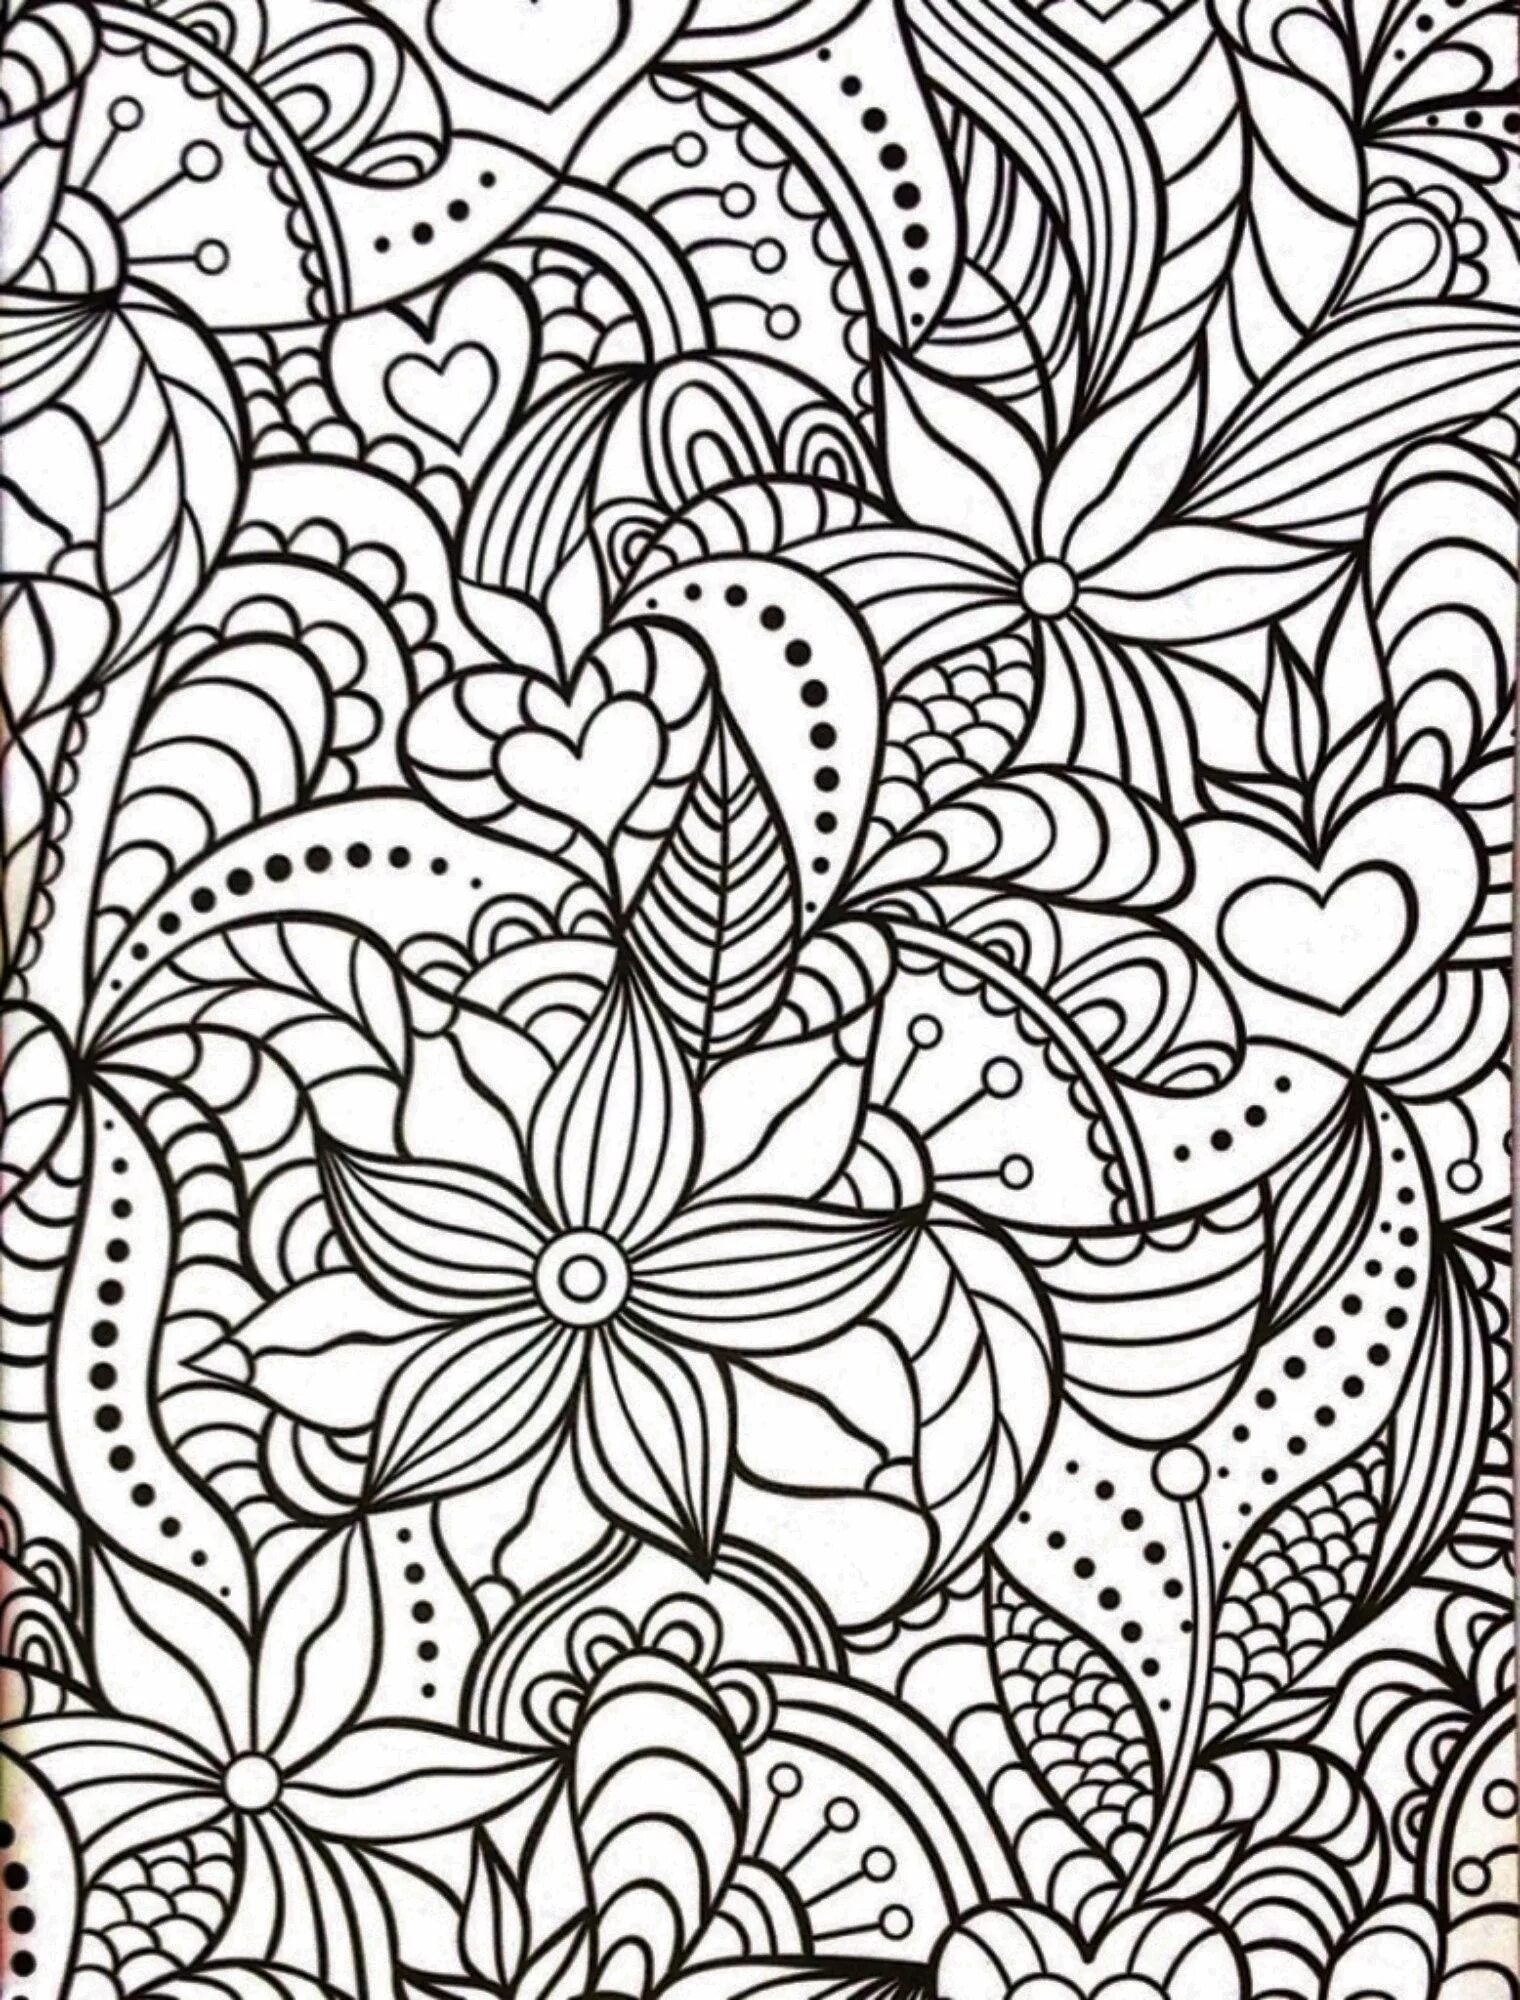 Cozy anti-stress coloring book for adults